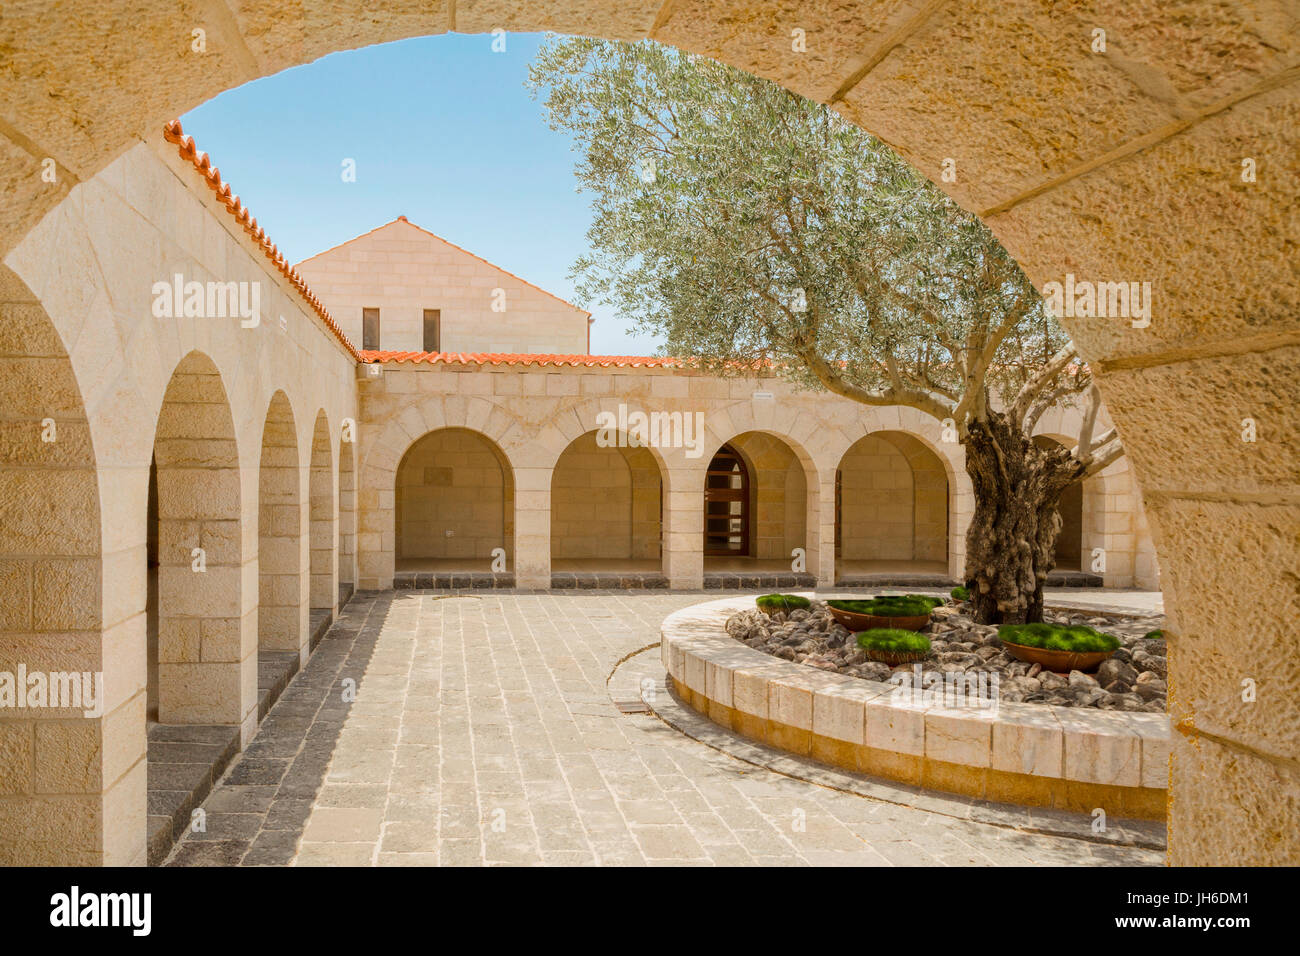 Courtyard of the Church of the Multiplication in Tabgha, Jesus' miracle of The Loaves and Fishes, Israel, Sea of Galilee, Israel. Stock Photo